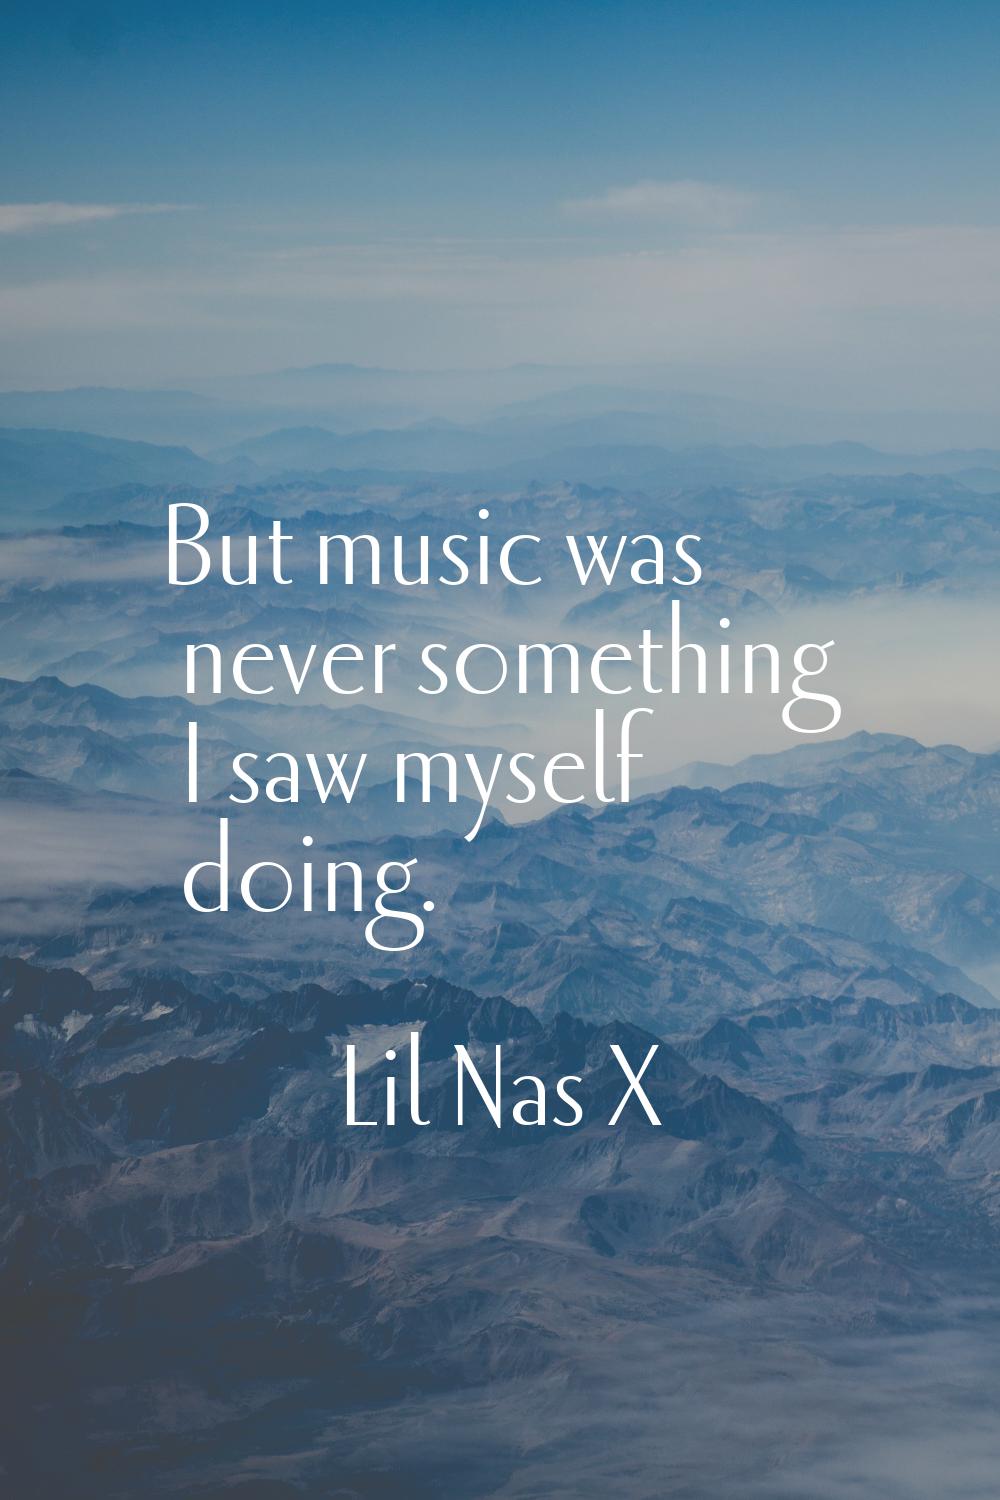 But music was never something I saw myself doing.